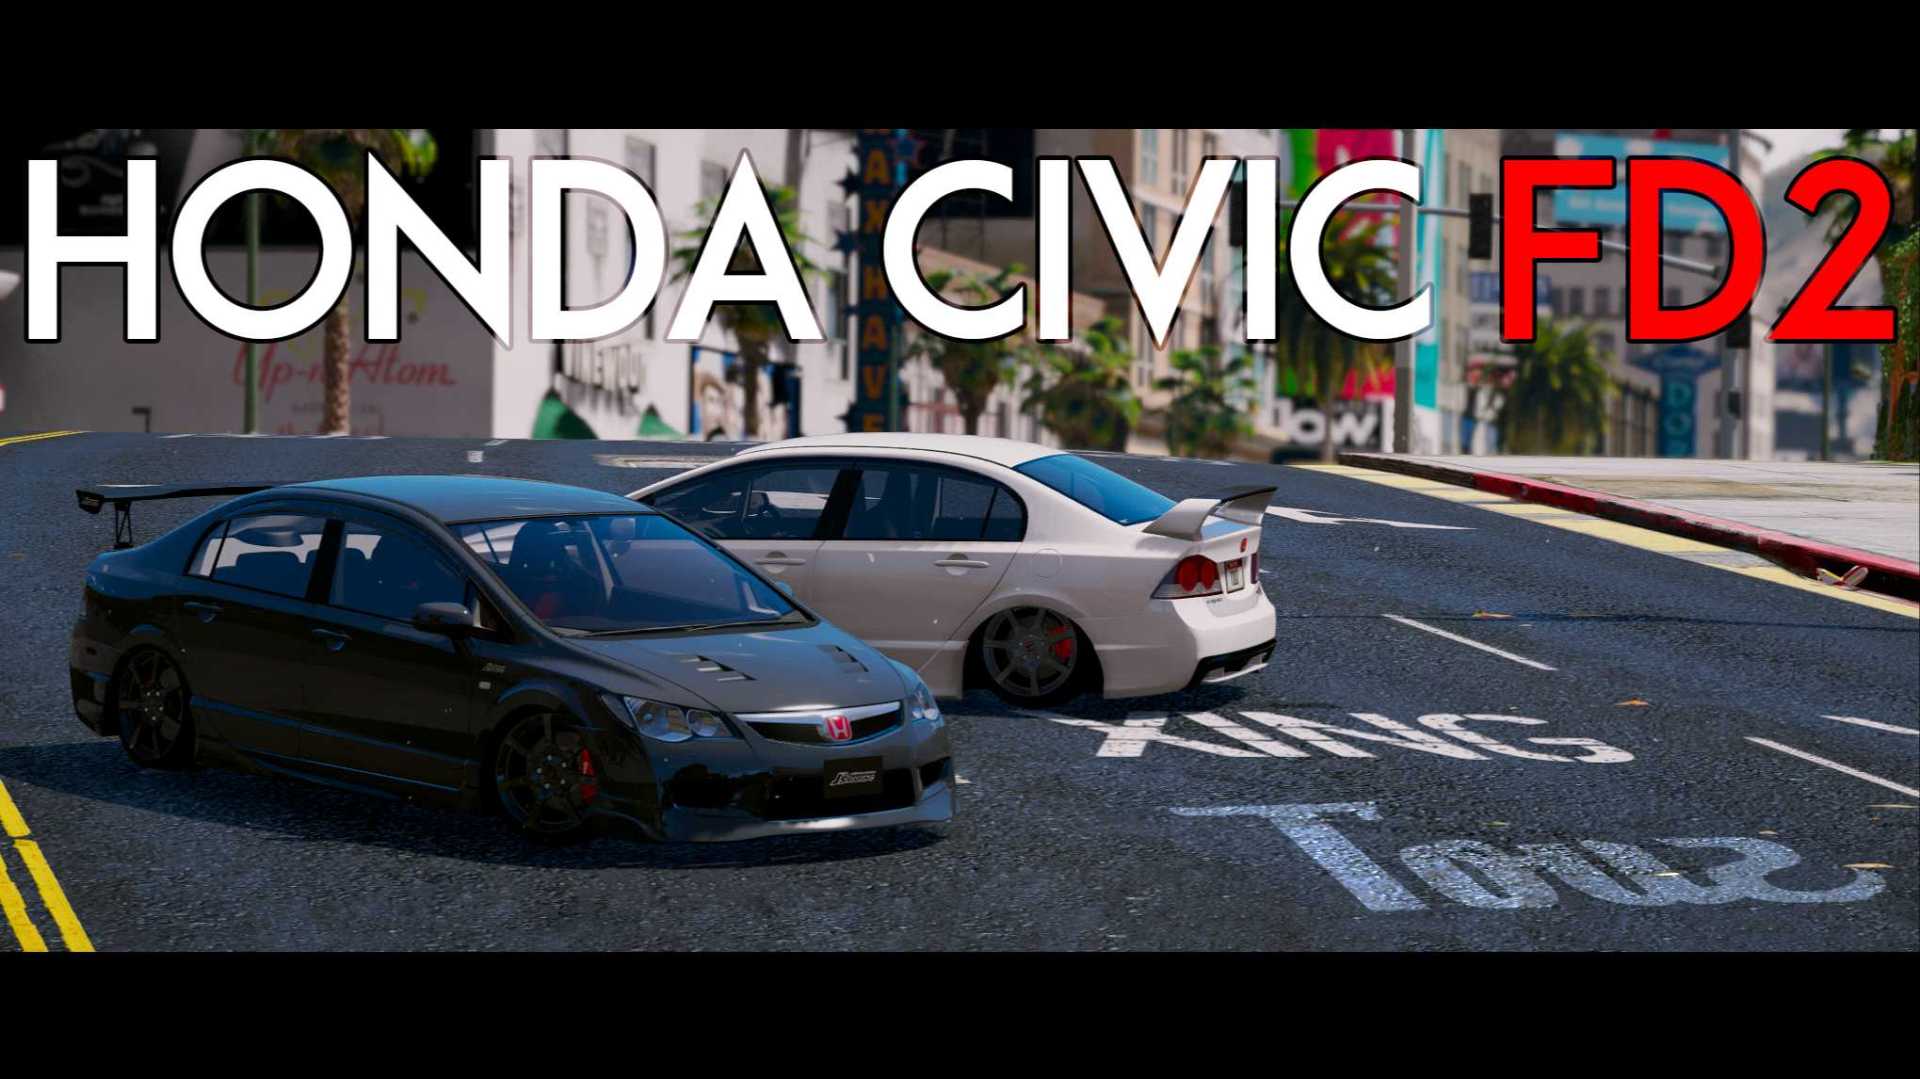 CIVIC FD2 TYPE R OLD VER